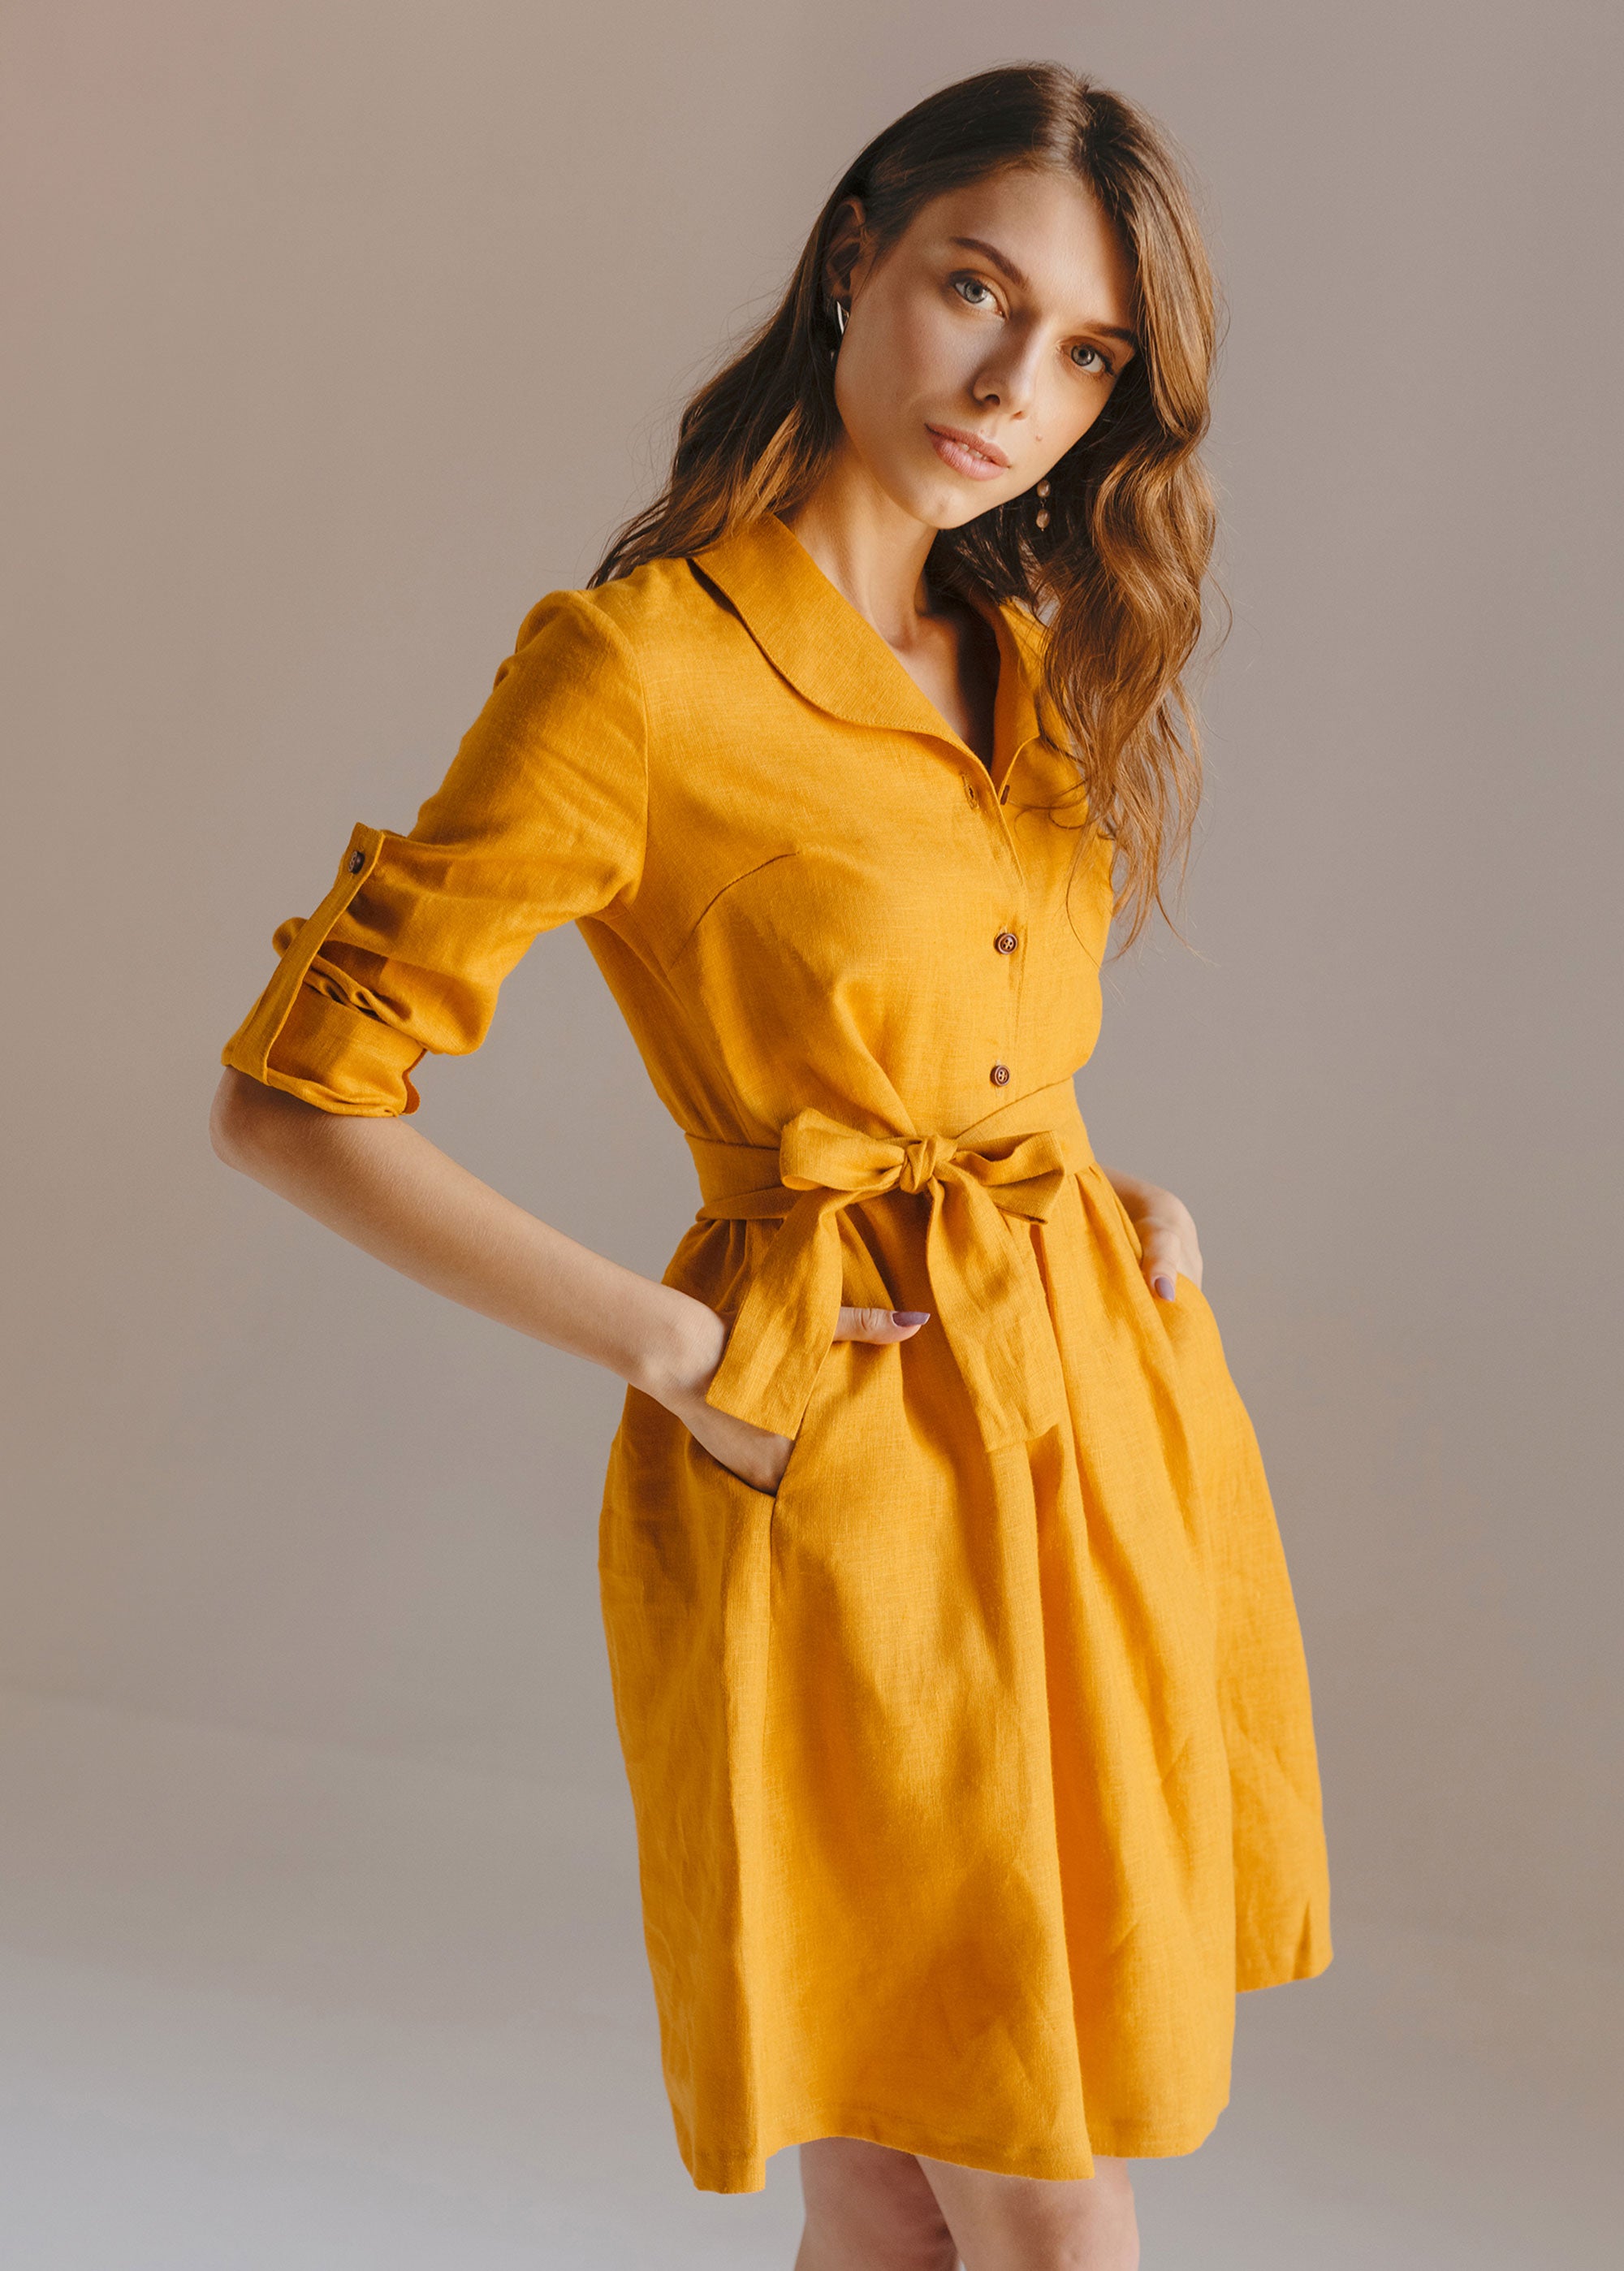 "Lily" Mustard Yellow Mini Dress with buttons